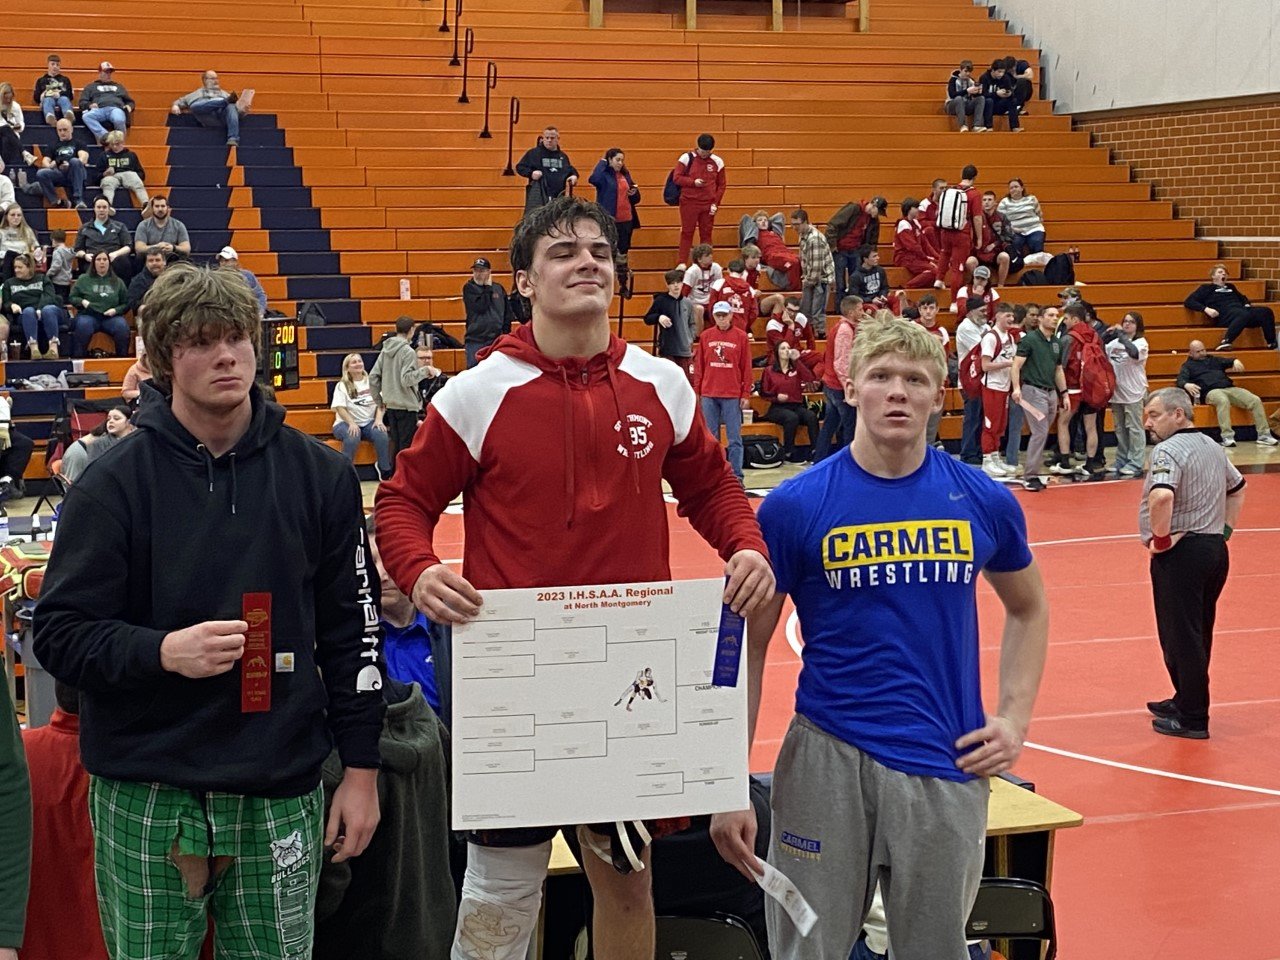 Southmont’s Wyatt Woodall continued his undefeated season Saturday on his way to the Regional title at 195 lbs. Woodall now sits at 35-0 on the season.